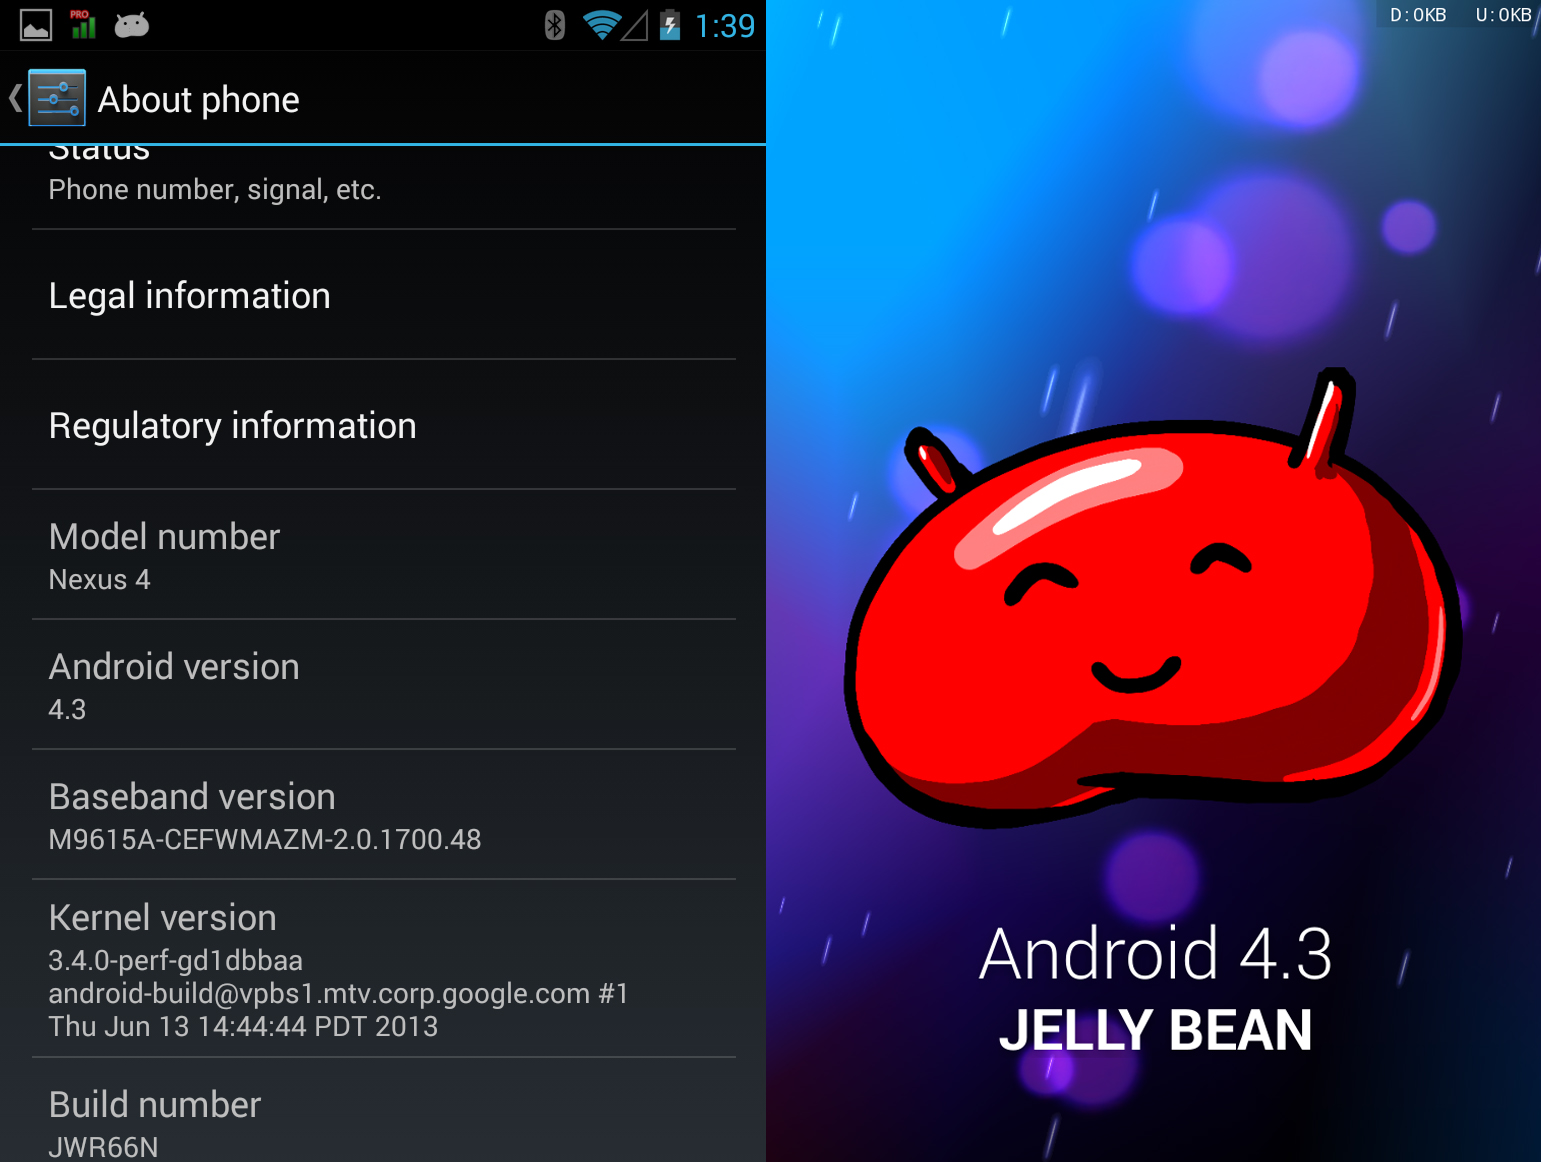 How To Update The Nexus 4 To Android 4.3 (JWR66N)